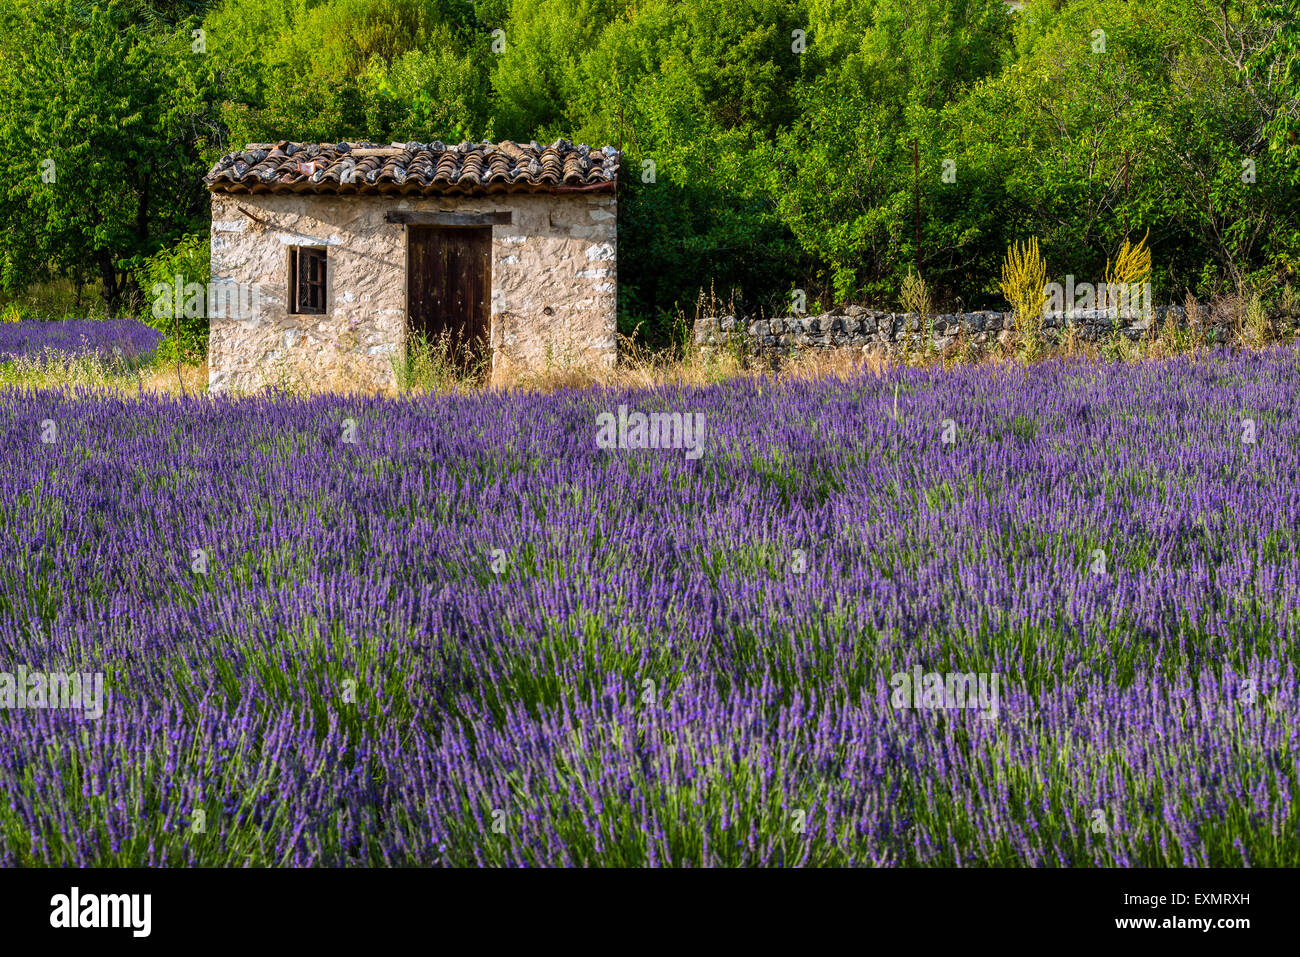 Stone cottage in the middle of a lavender field in bloom, Provence, France Stock Photo